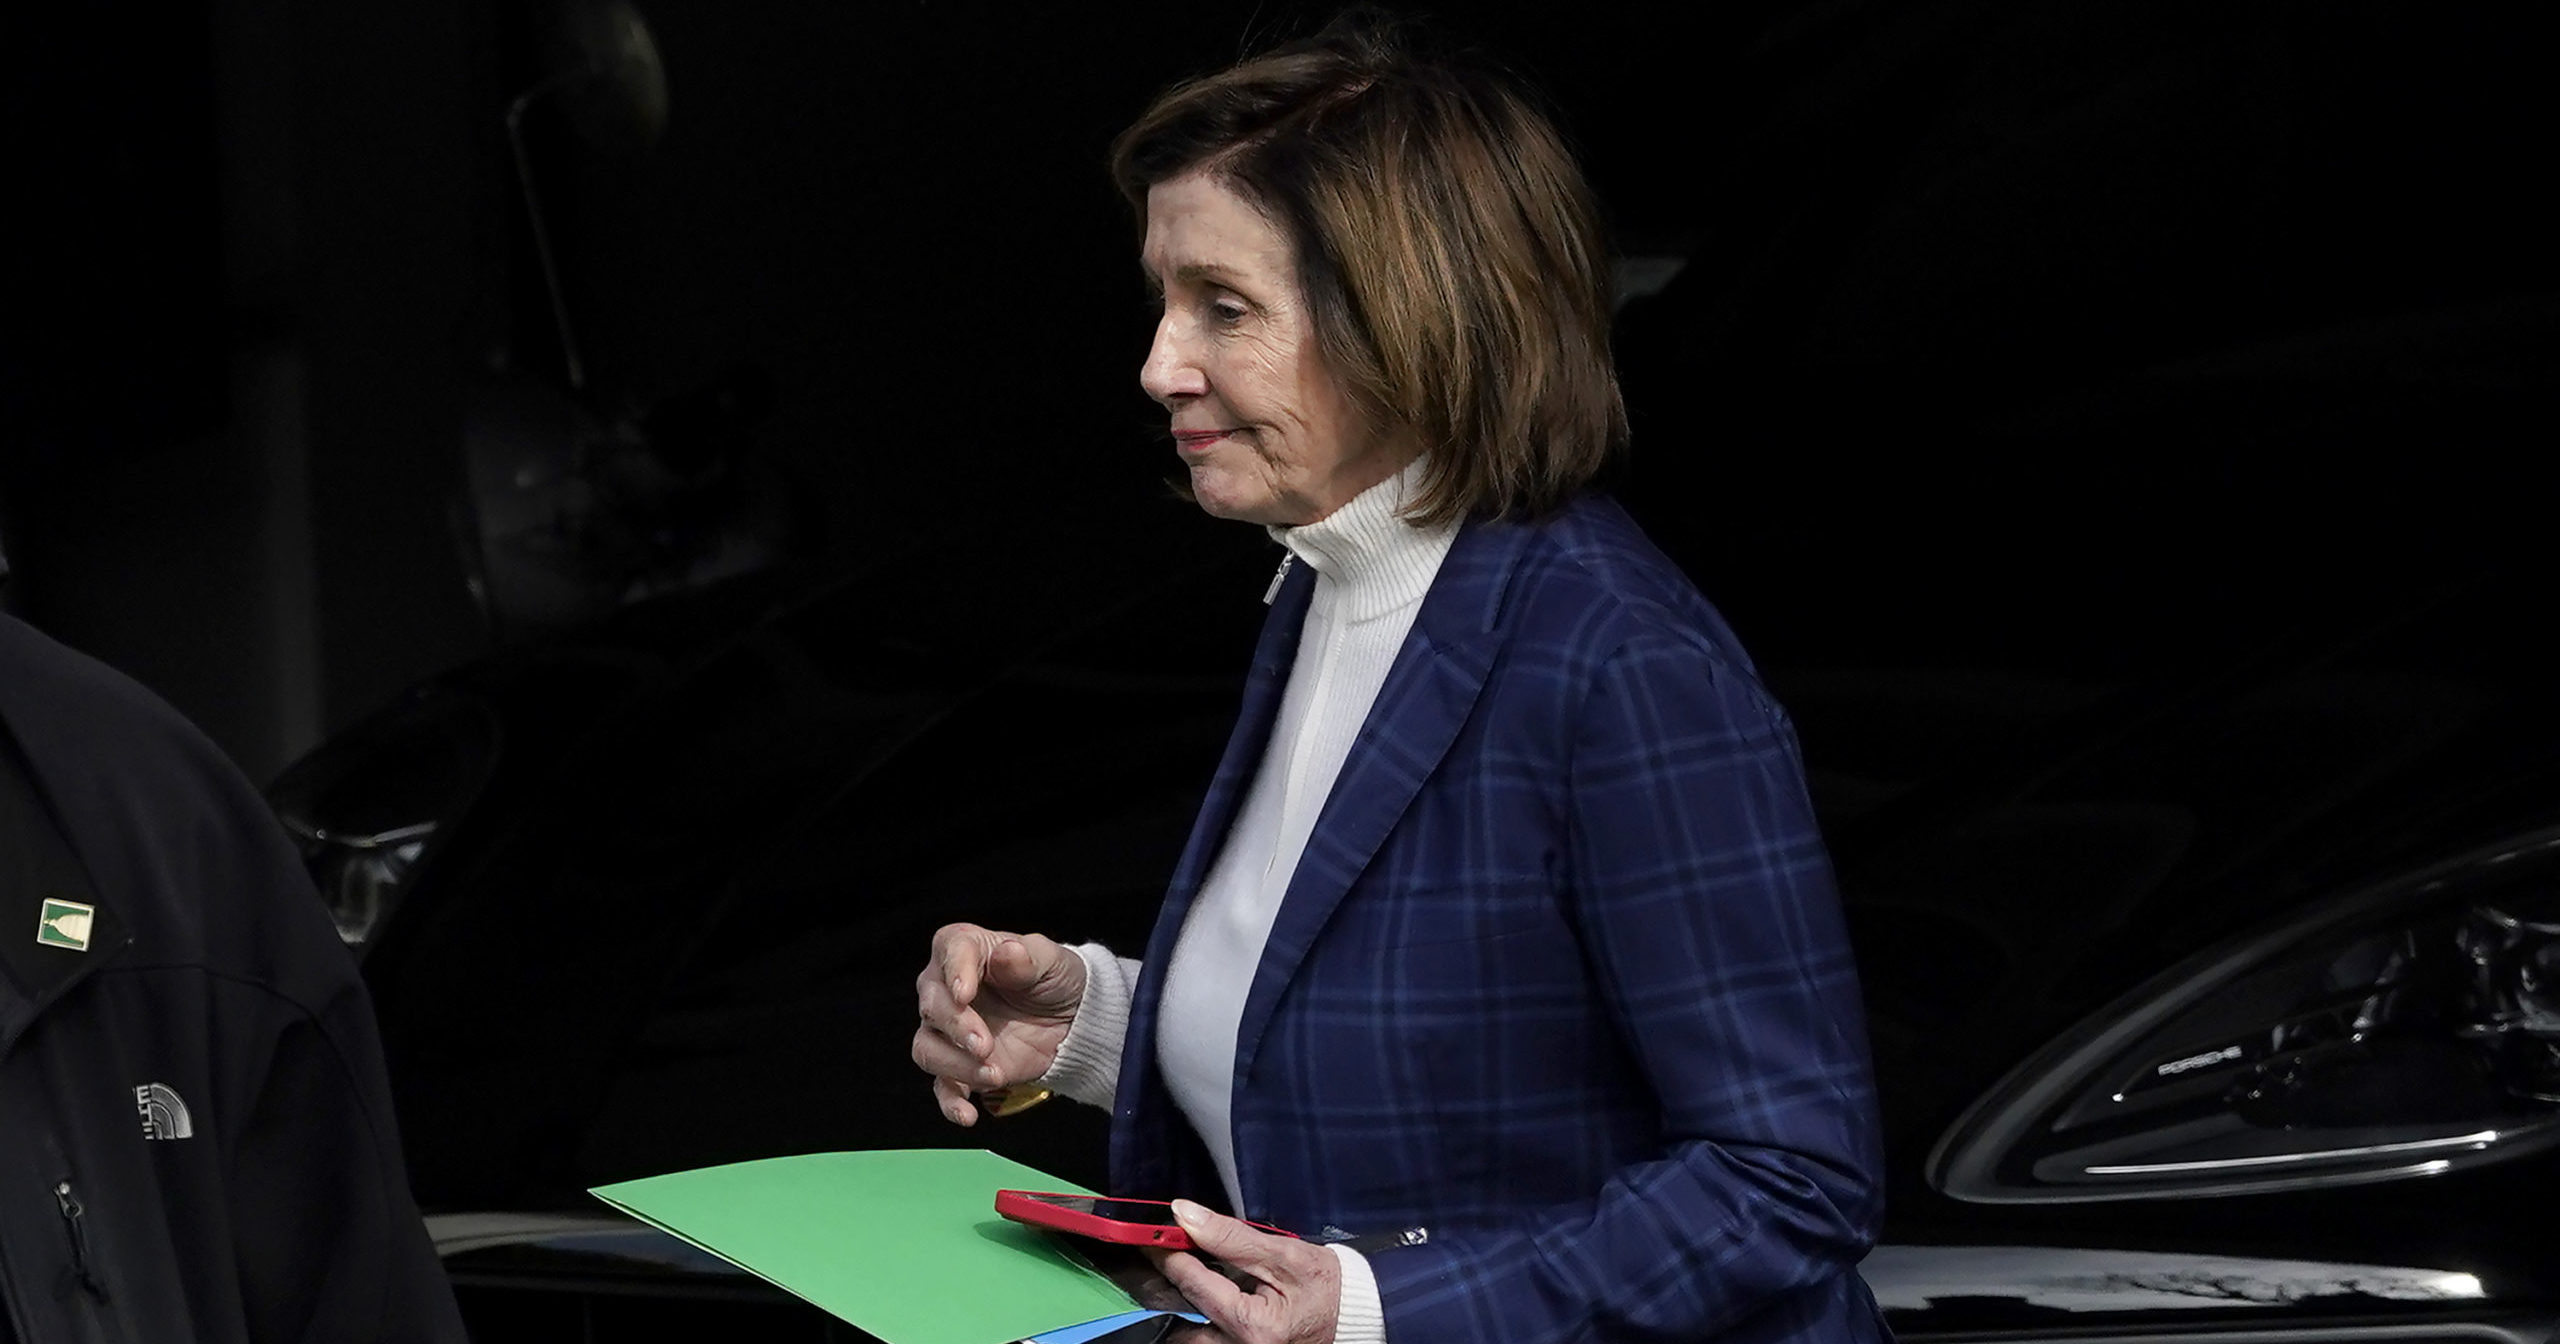 House Speaker Nancy Pelosi is escorted to a vehicle outside of her home in San Francisco, California on Friday.